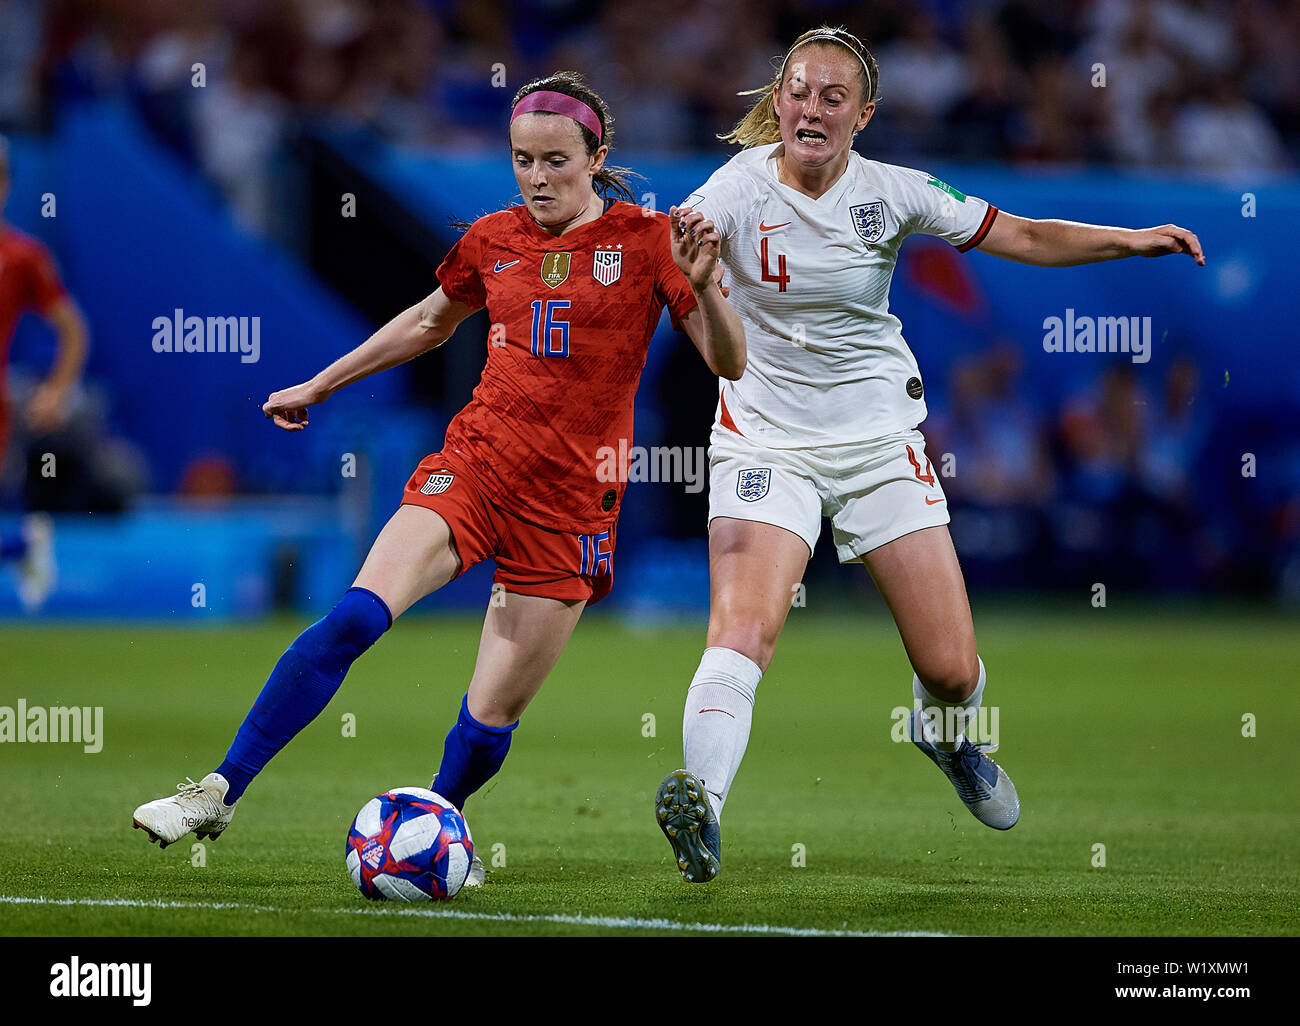 LYON, FRANCE - JULY 02: Rose Lavelle of the USA and Keira Walsh of England competes for the ball during the 2019 FIFA Women's World Cup France Semi Final match between England and USA at Stade de Lyon on July 2, 2019 in Lyon, France. (Photo by David Aliaga/MB Media) Stock Photo